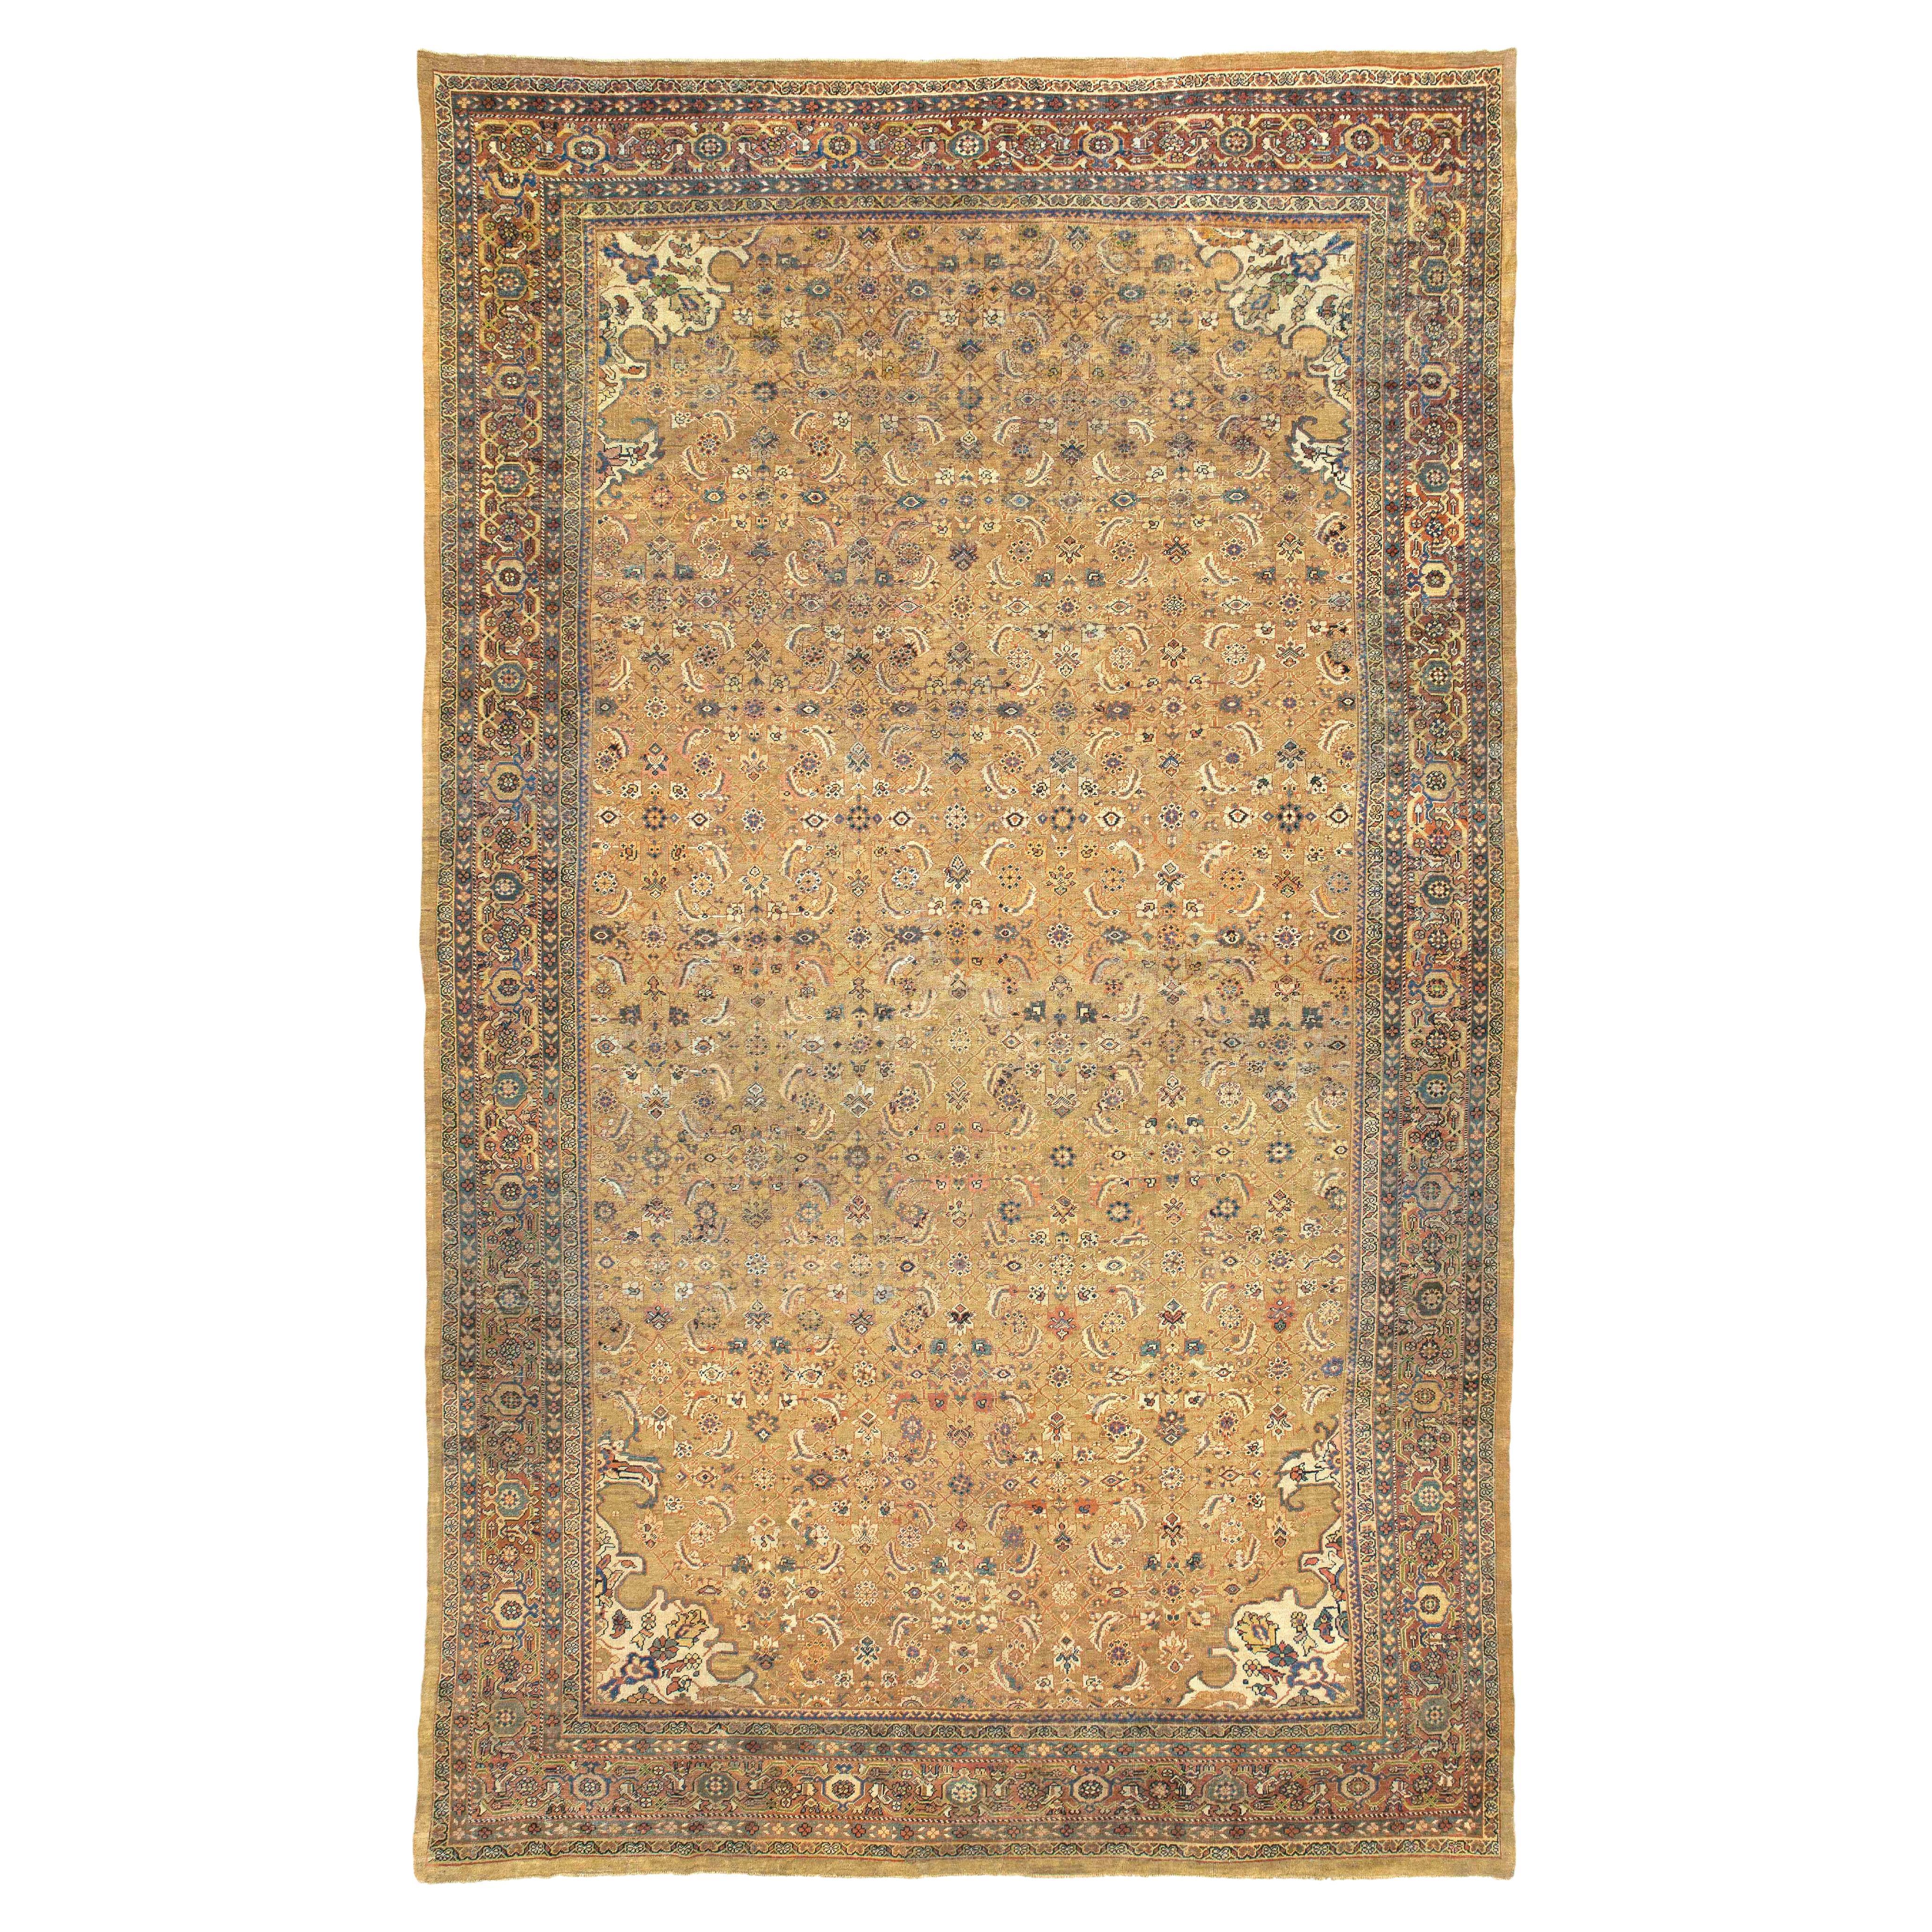 Oversize Antique Handwoven Persian Area Rug Sultanabad Design For Sale